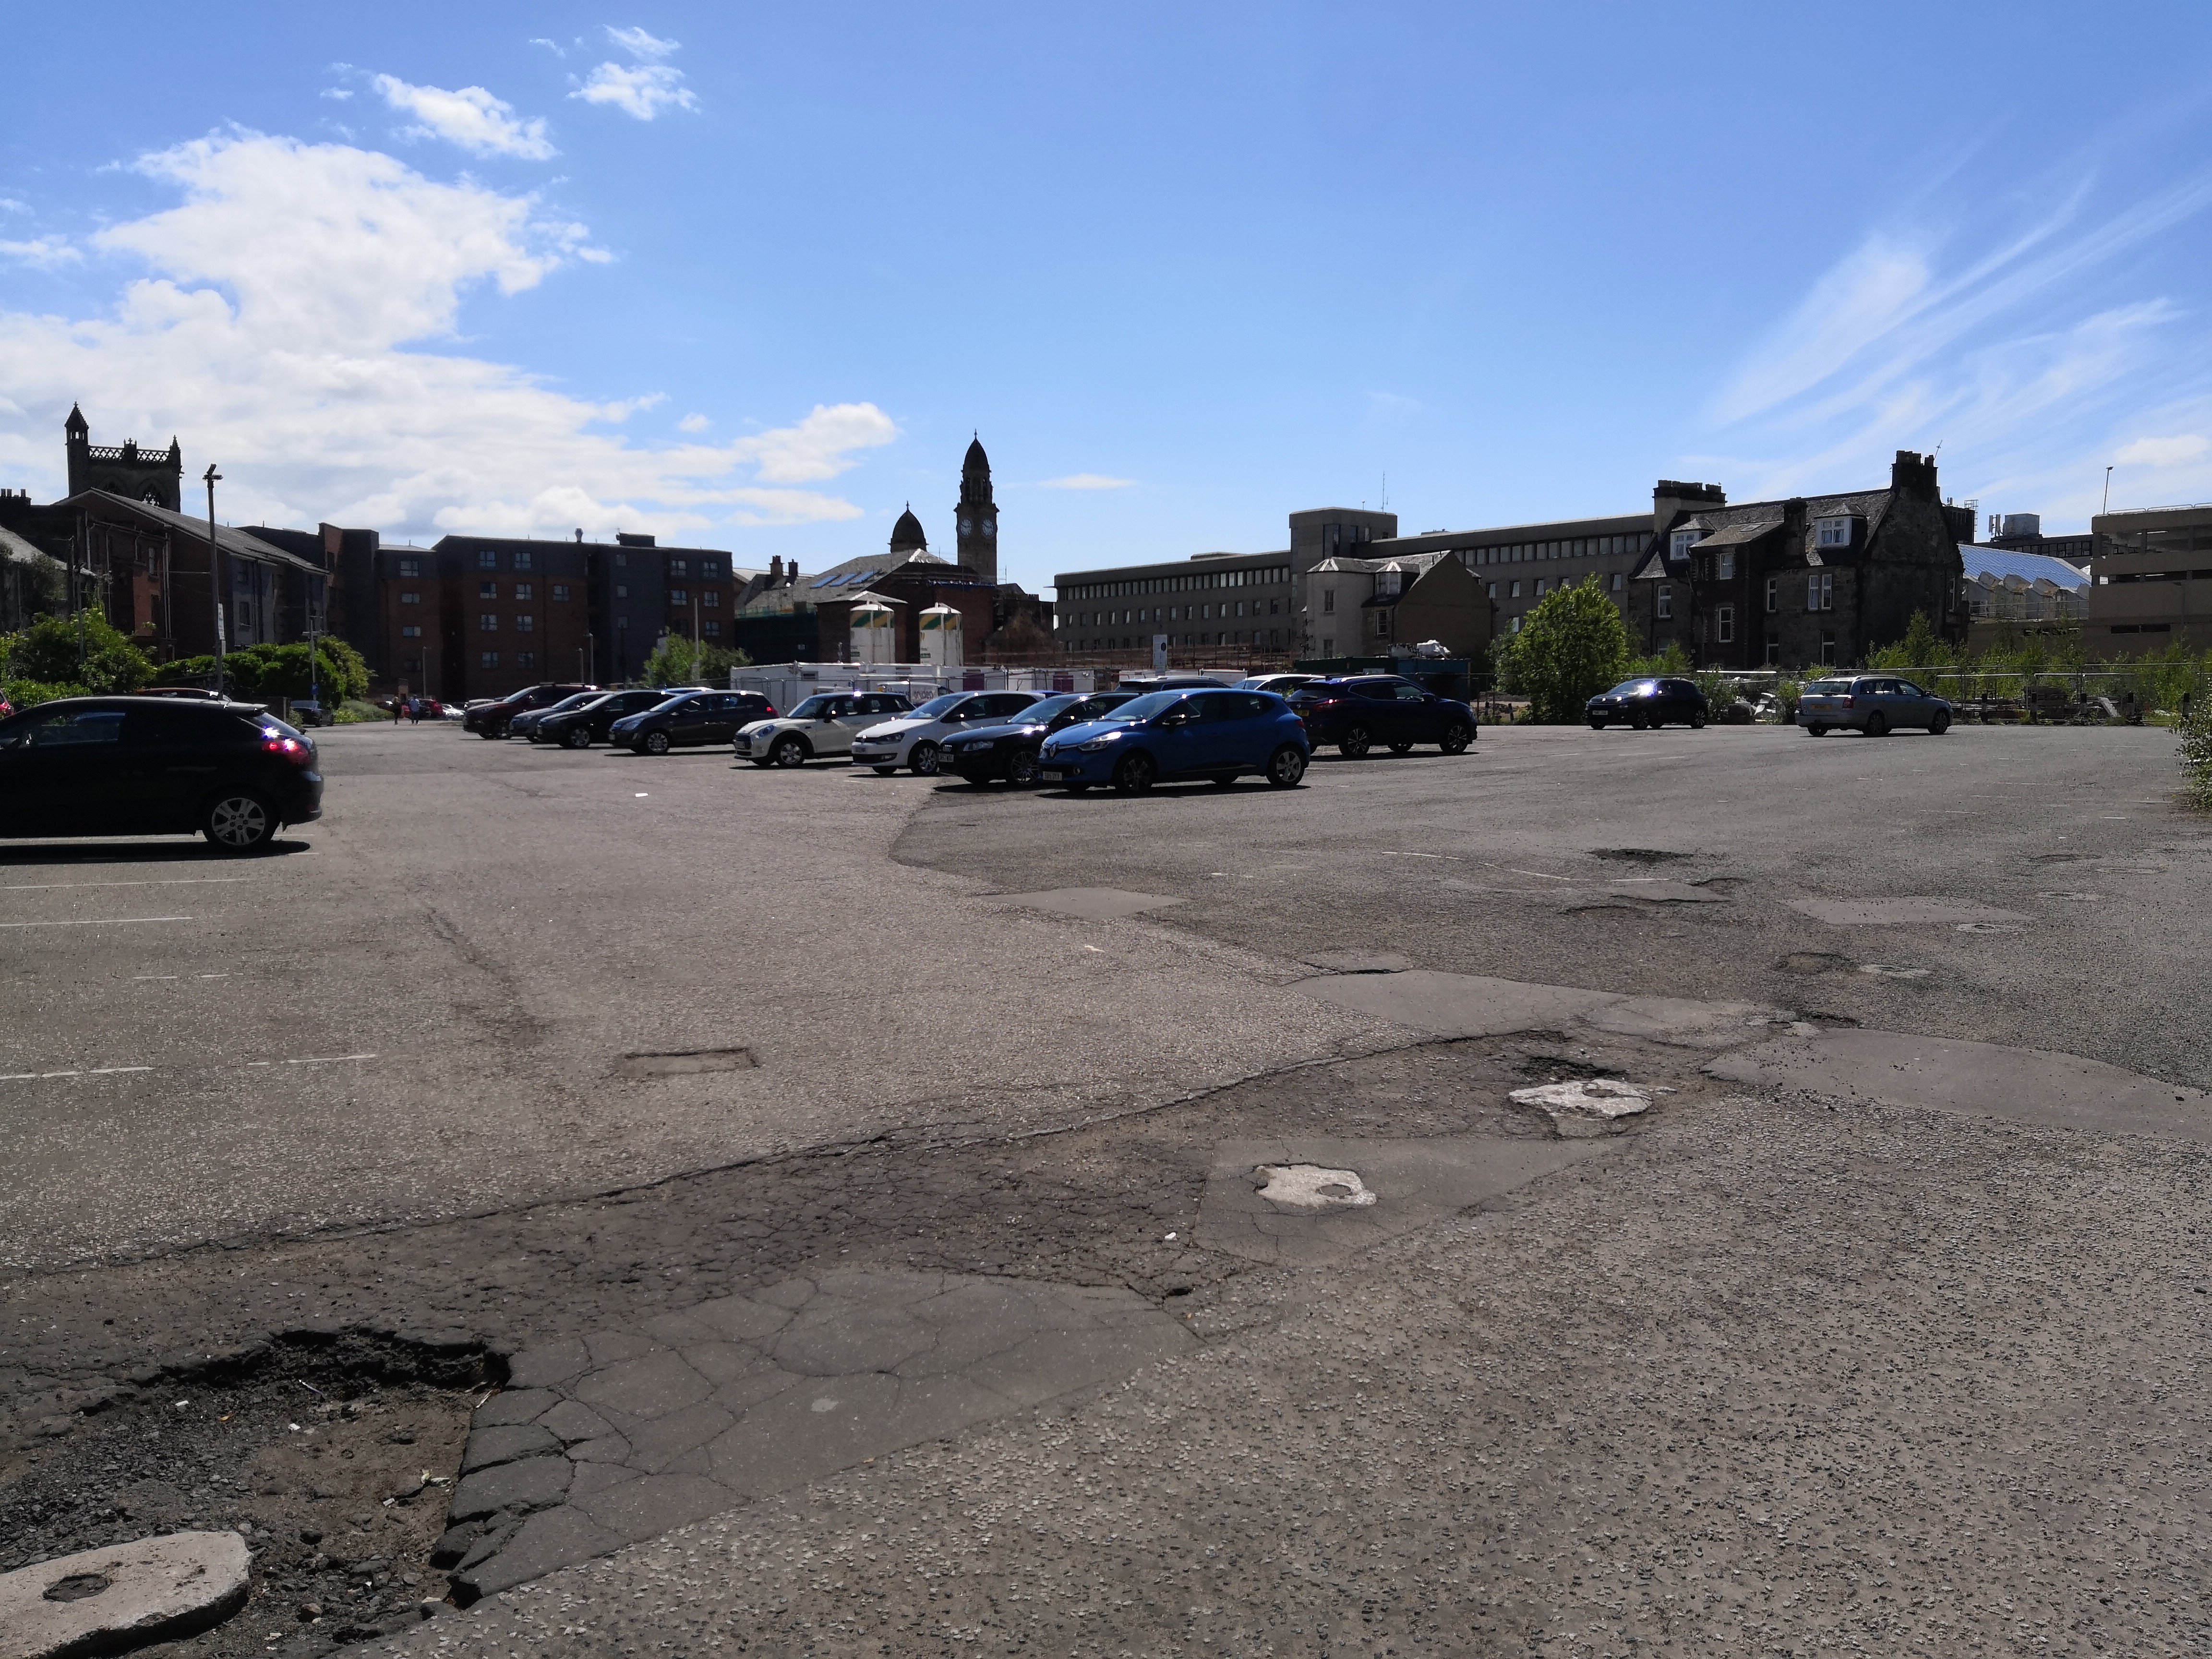 New homes planned for final phase of development at Paisley retail site